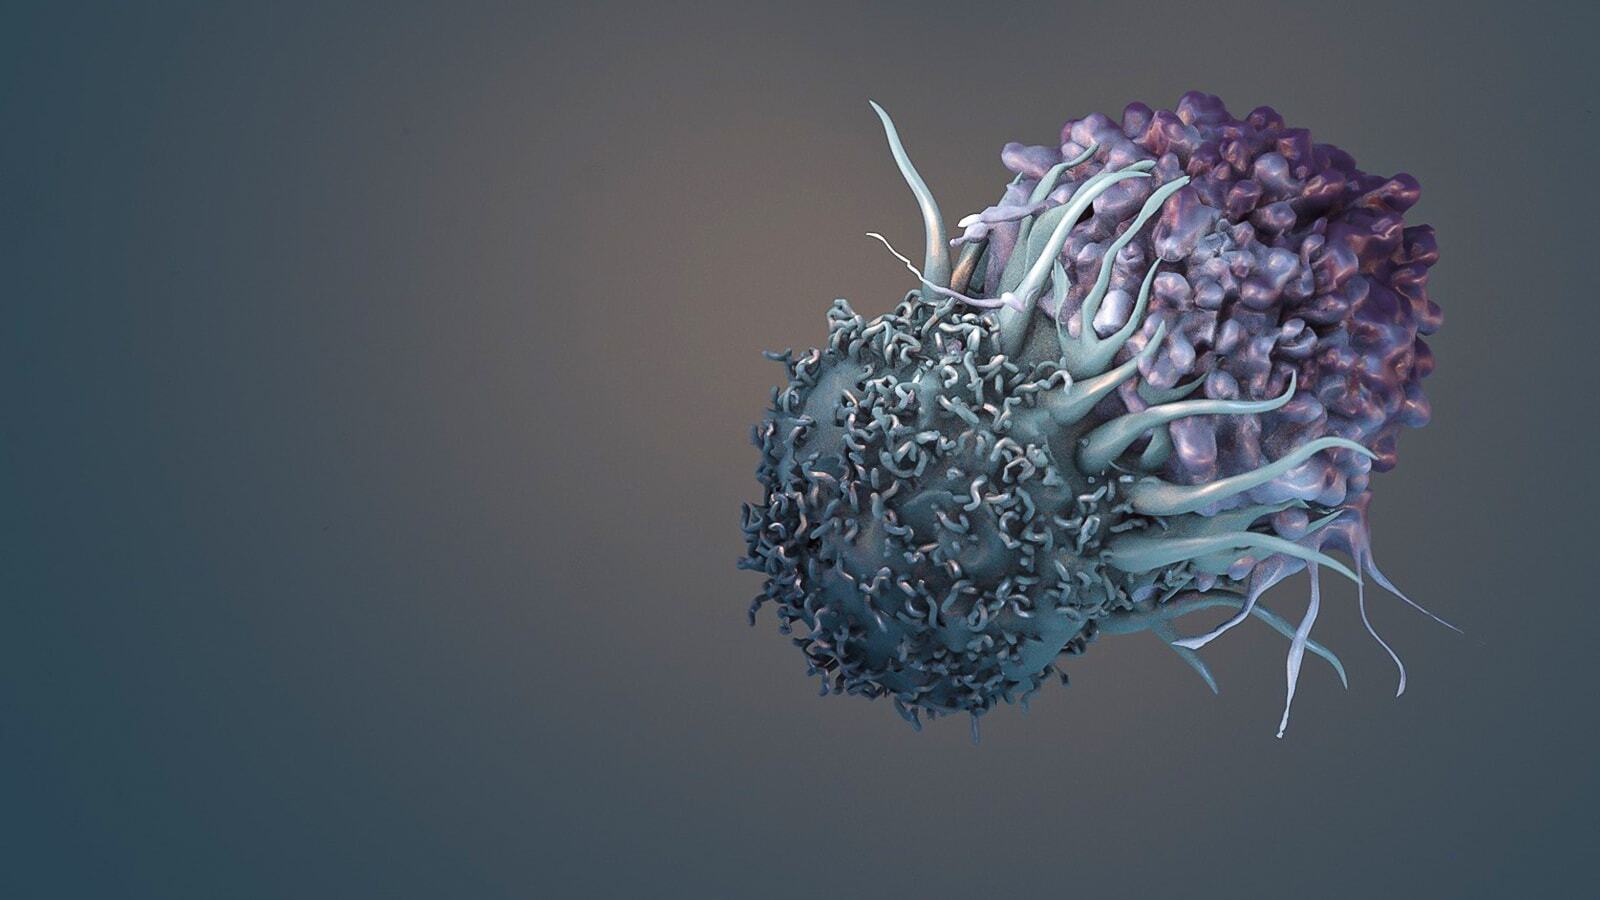 Cancer Cell Apoptosis  Stock Image  C0307081  Science Photo Library